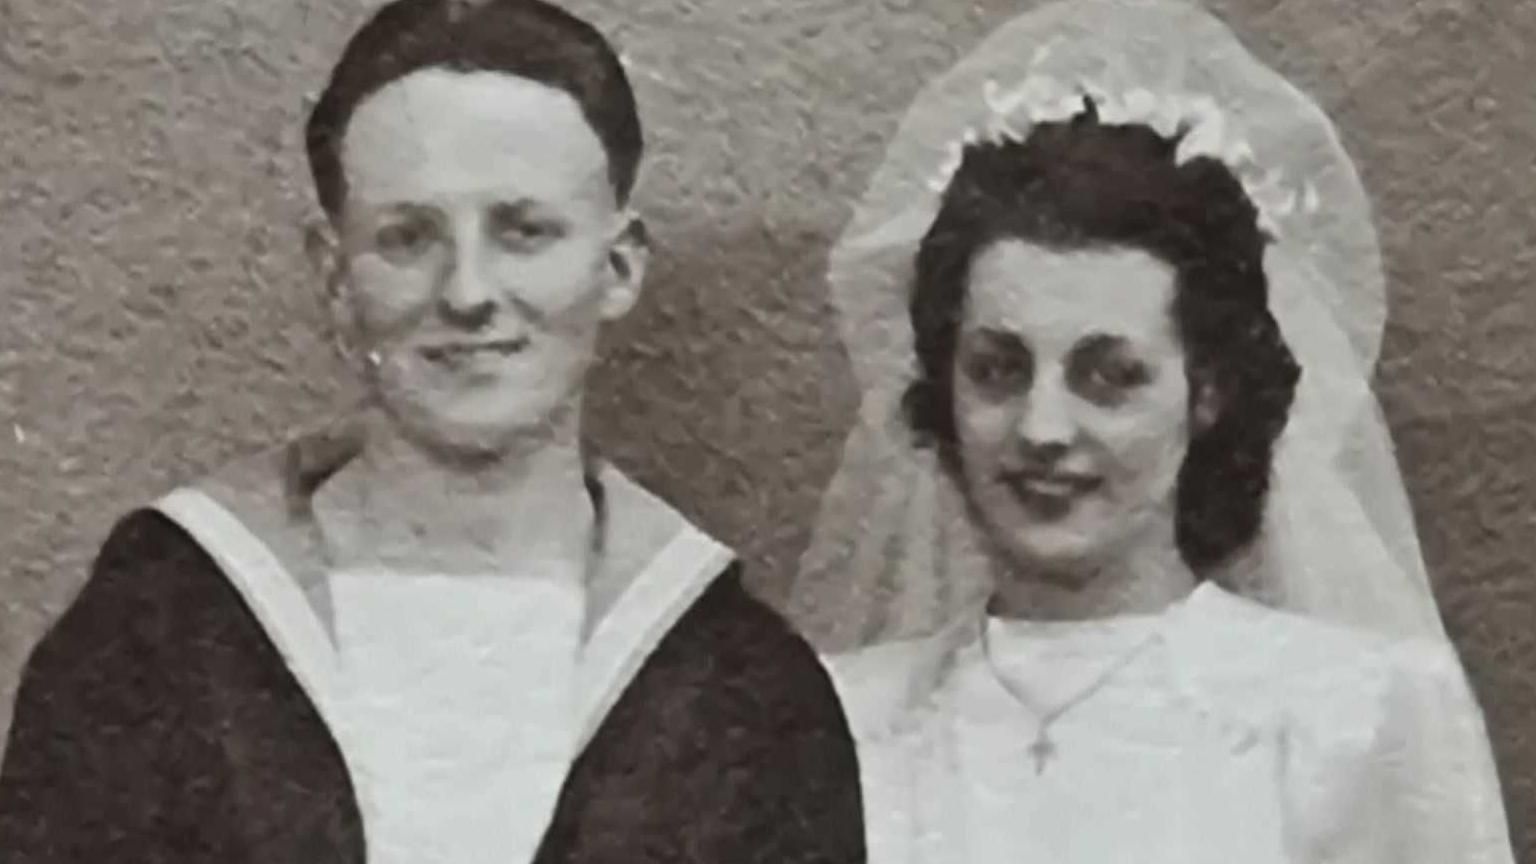 Black and White photo of Mr Bartlett in his naval uniform and his wife in a wedding dress